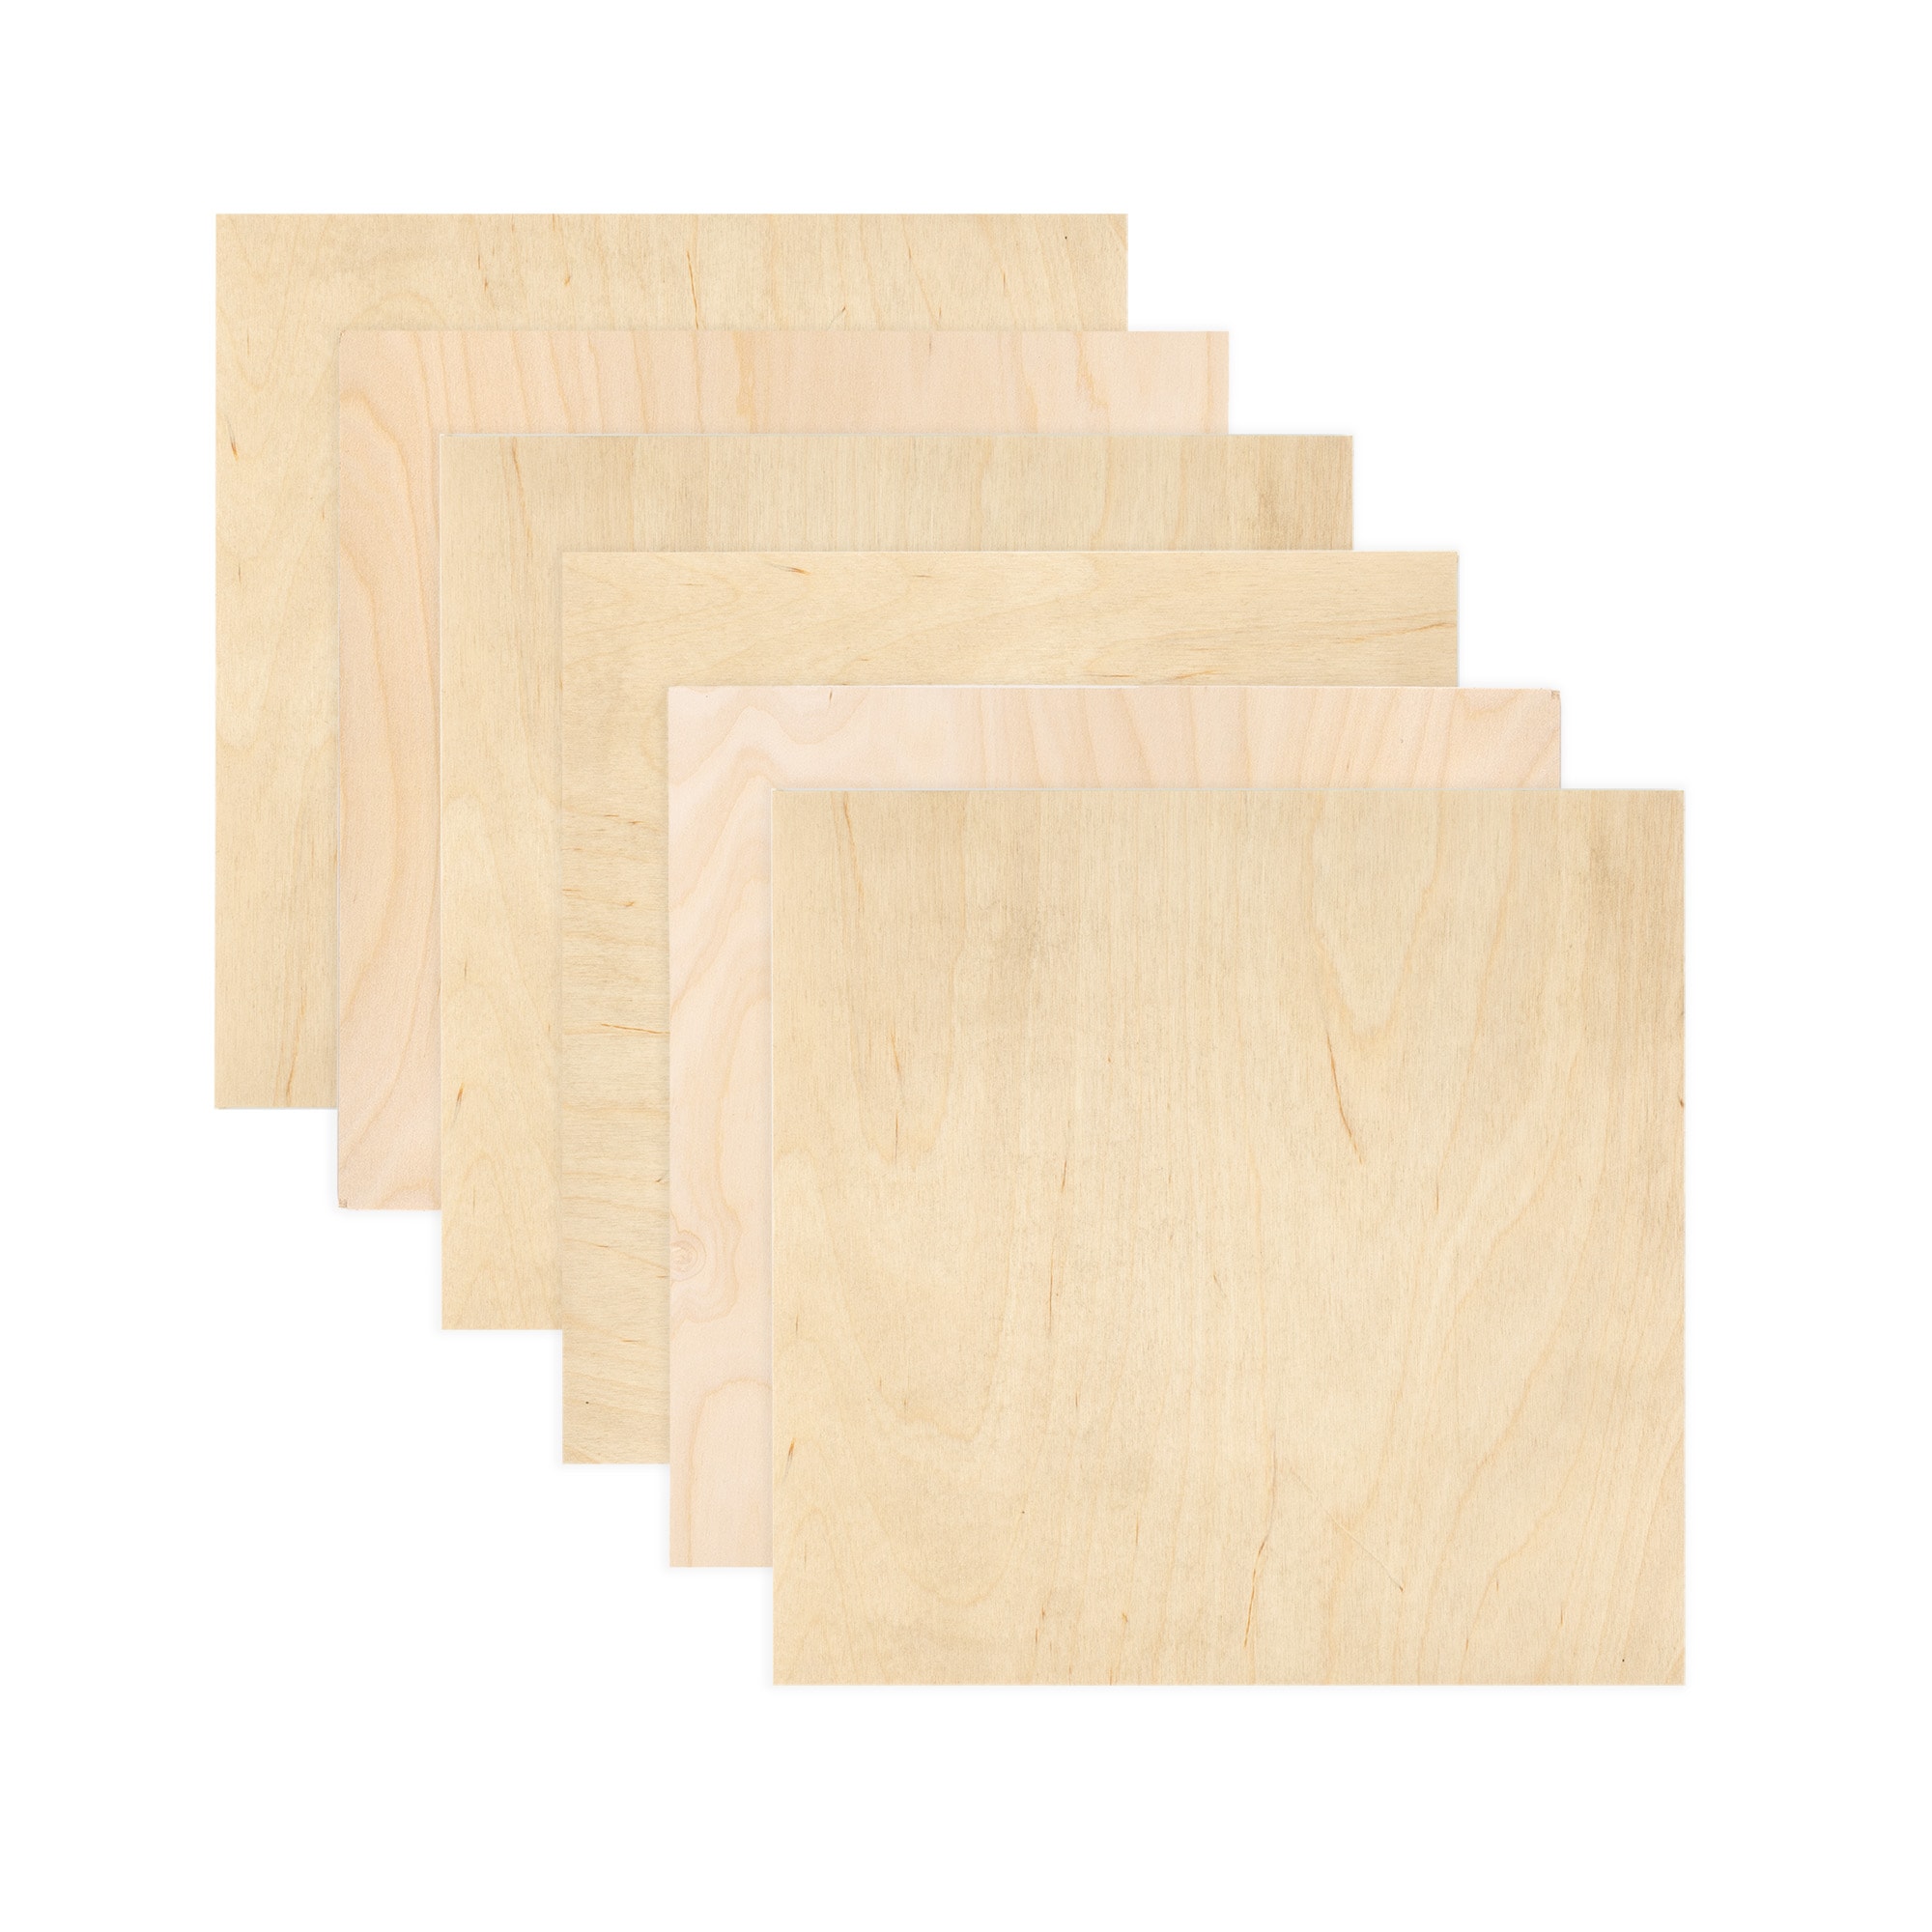 Plywood Hearts - 4 inch (Package of 10) 1/8 Baltic Birch